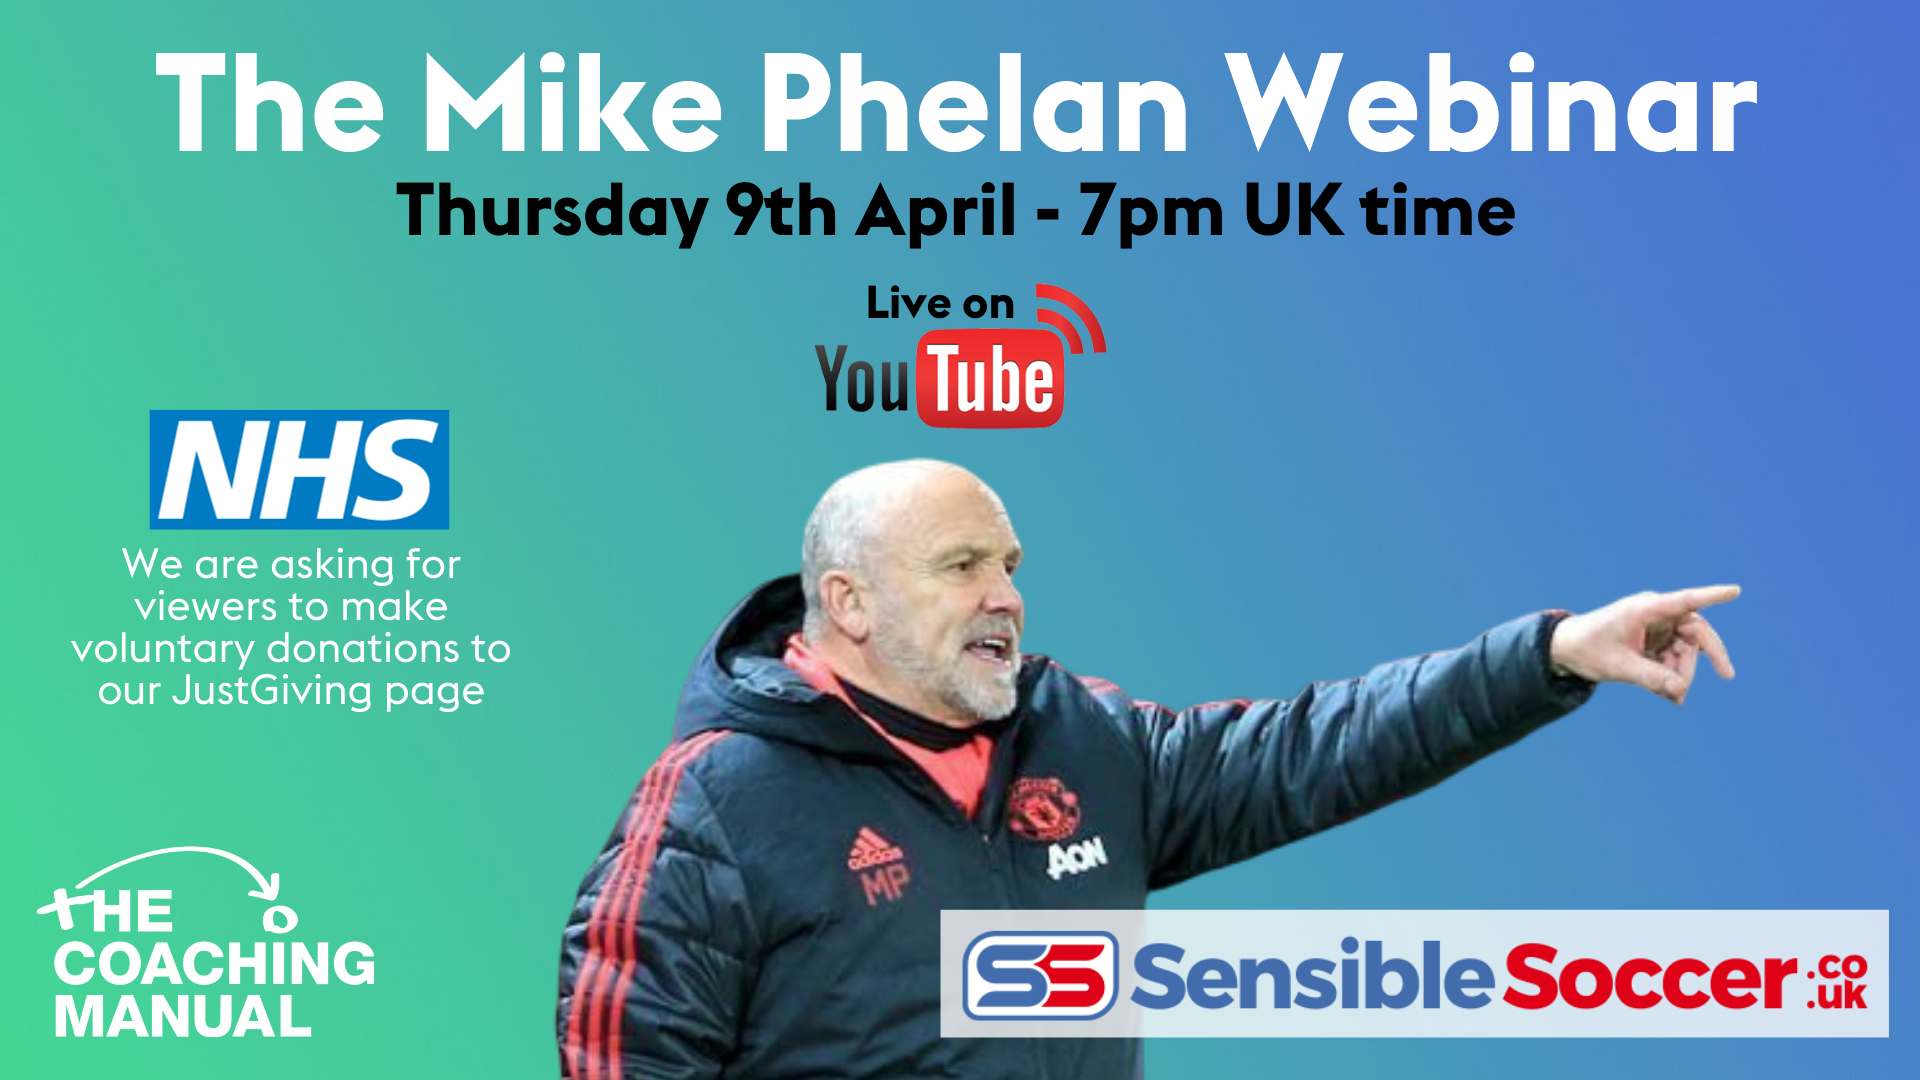 How to watch The Mike Phelan Webinar for FREE